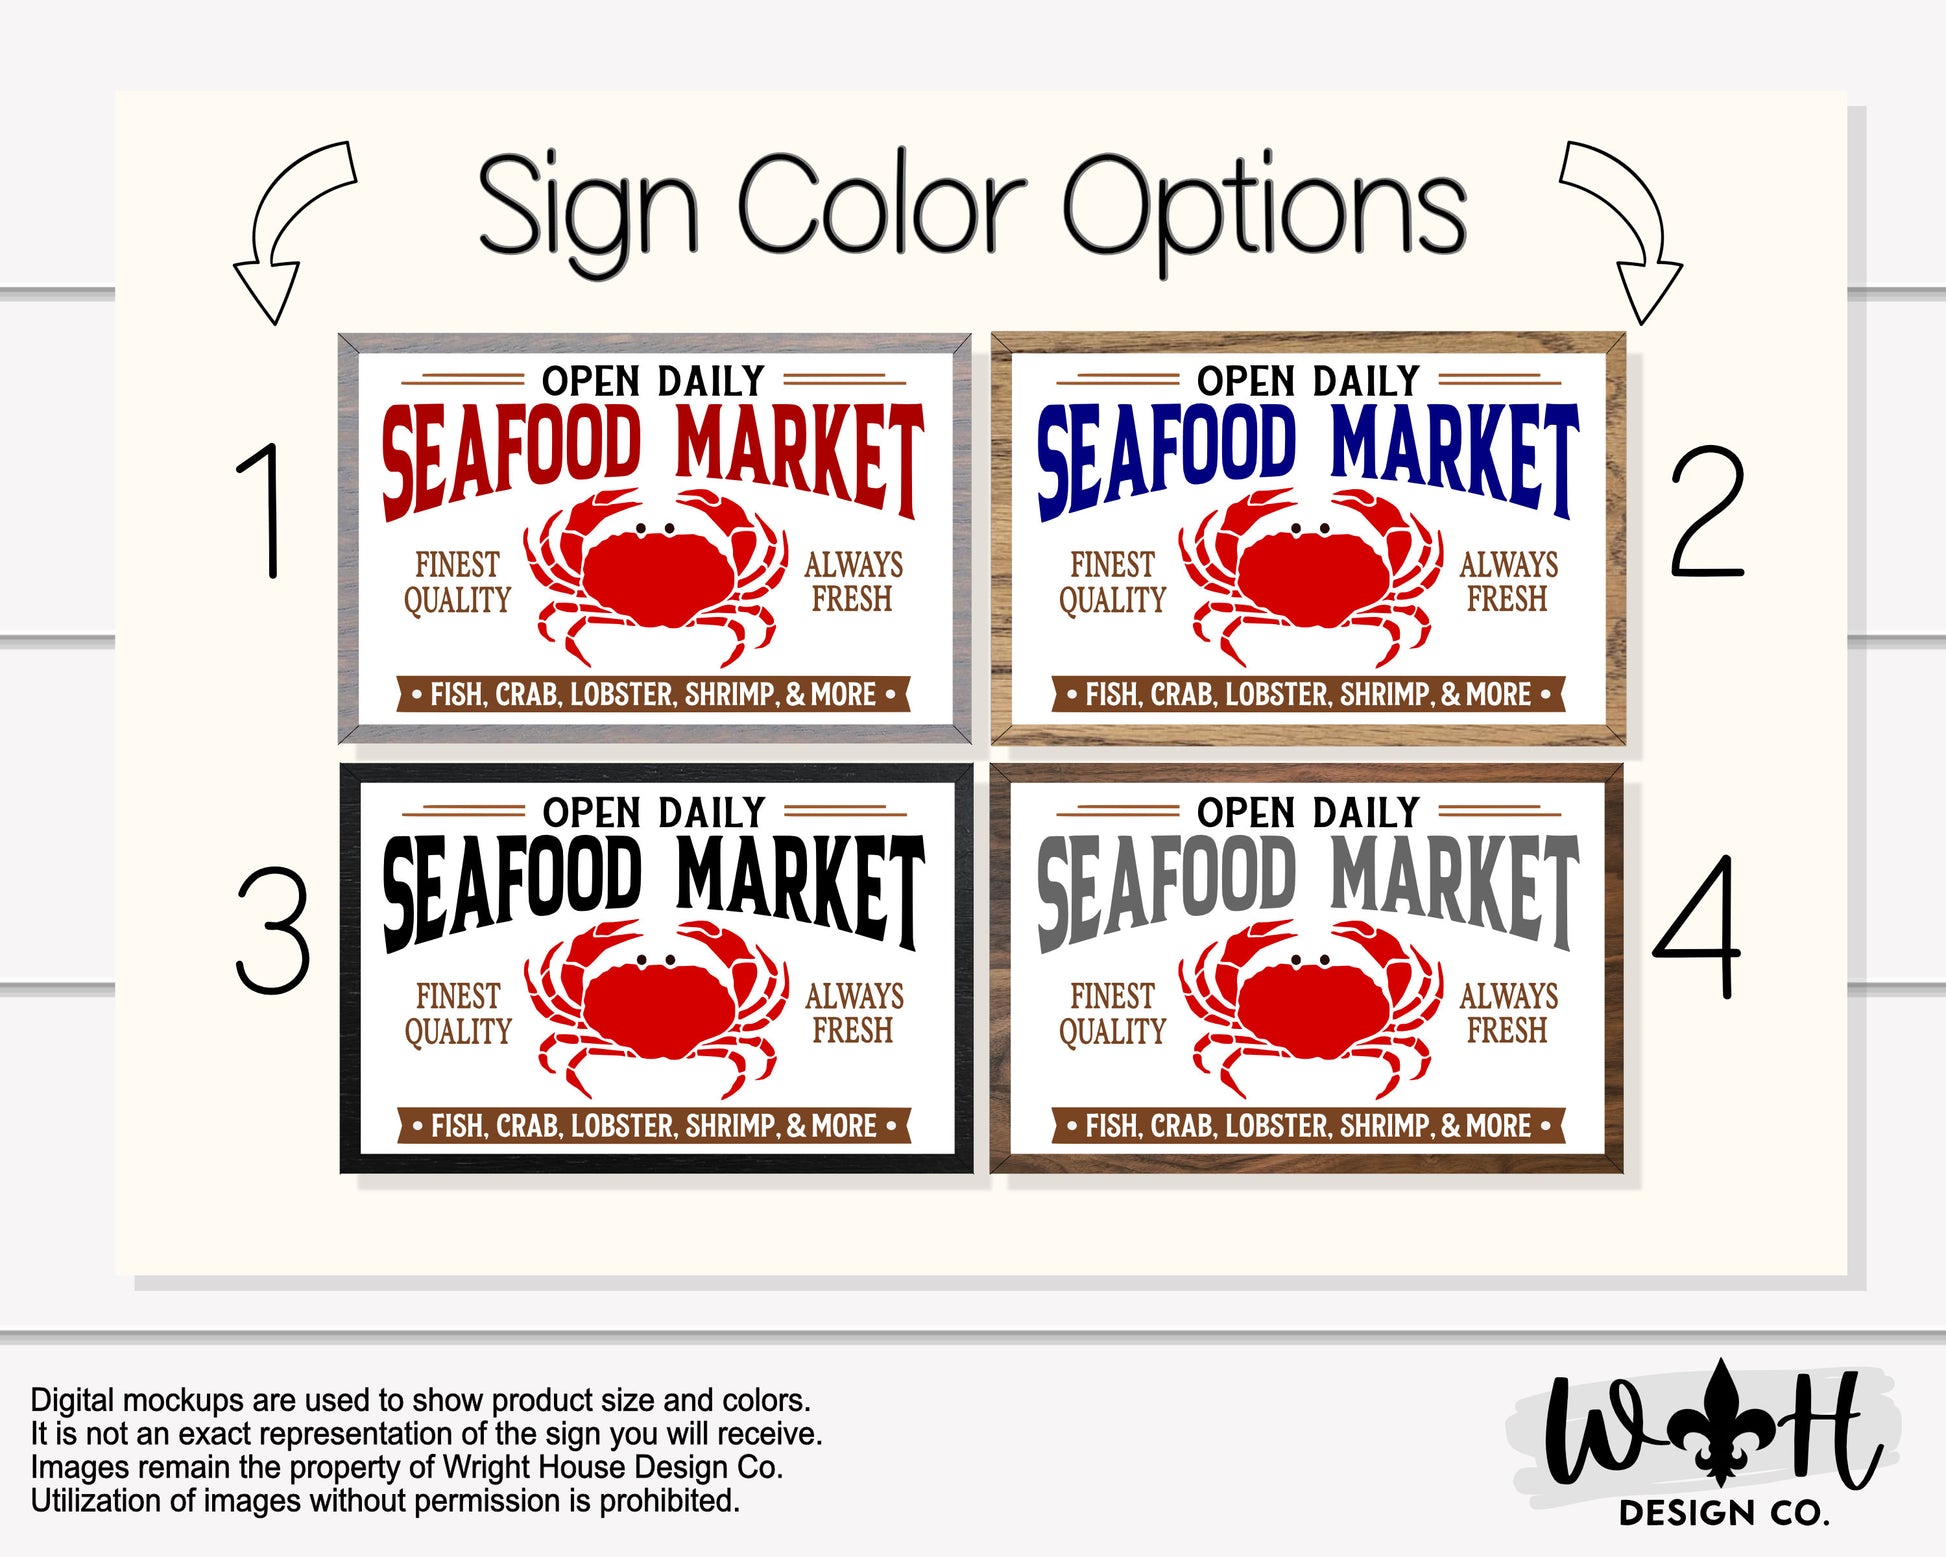 Open Daily Seafood Market Fish Crab Lobster - Summer Coffee Bar Sign - Modern Farmhouse Sign - Home and Kitchen Decor - Wood Framed Wall Art